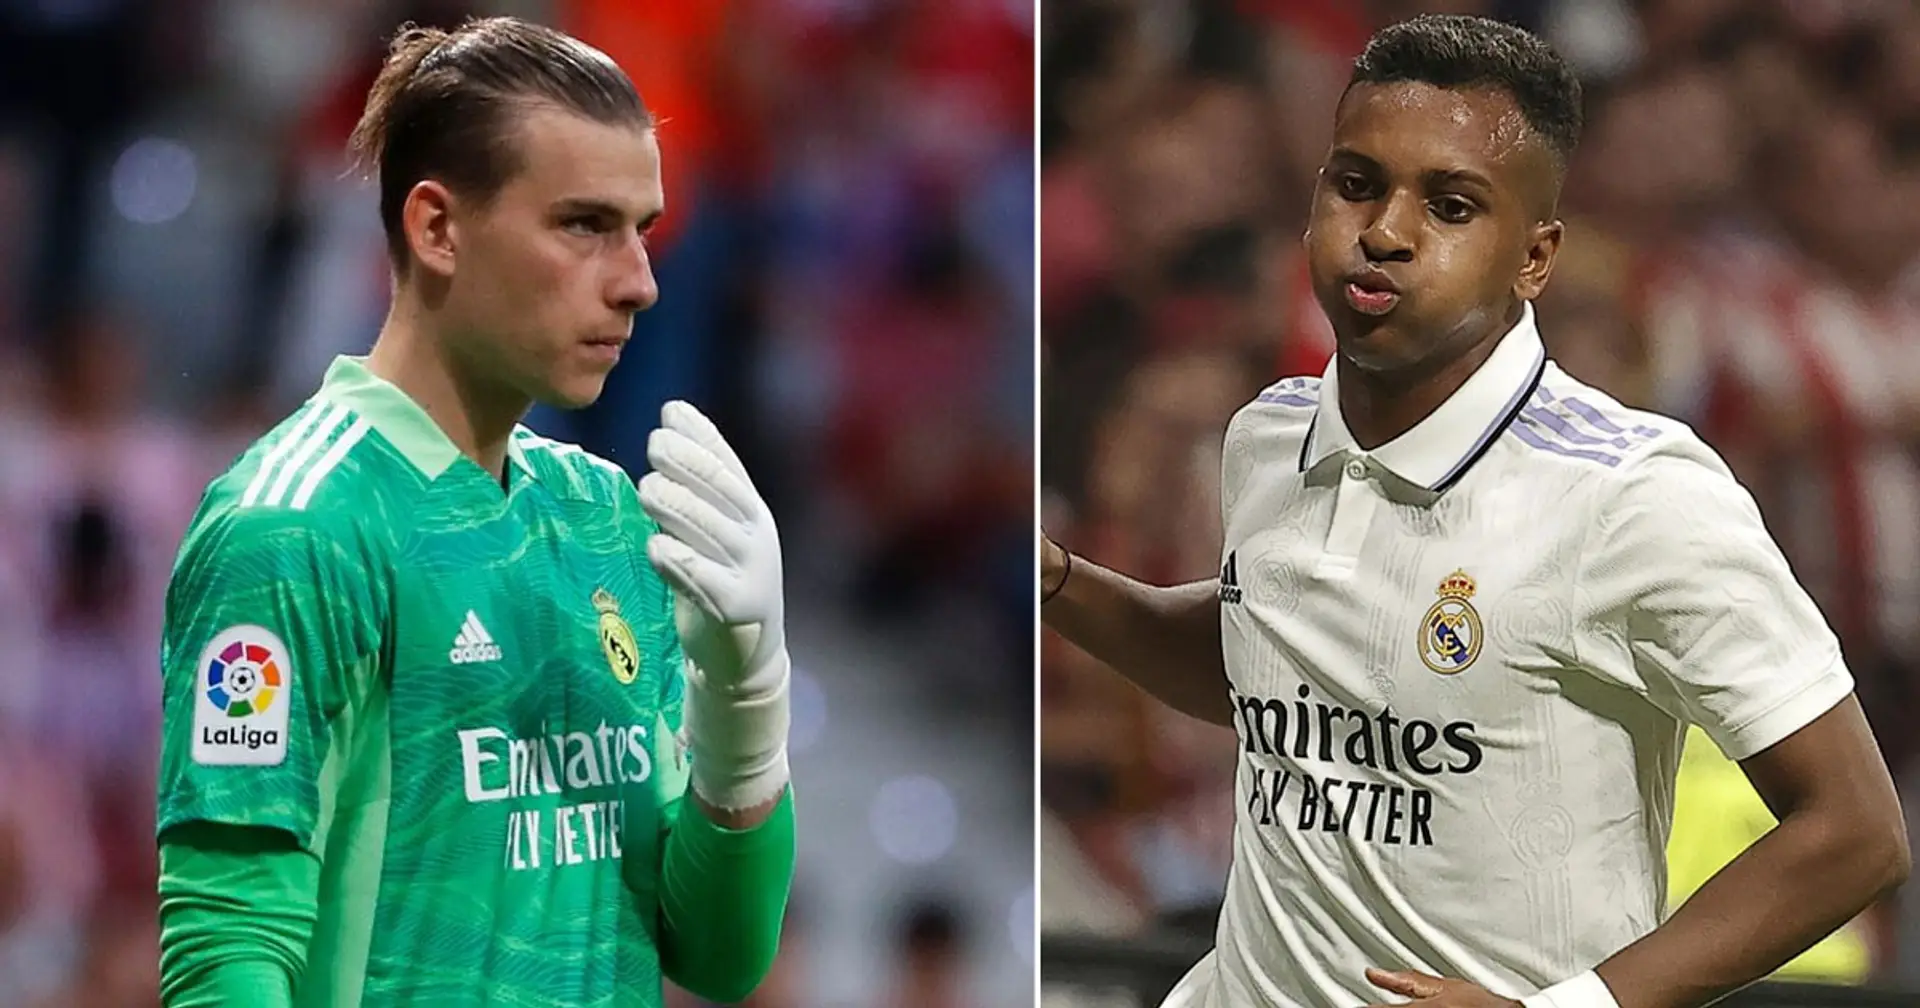 Ancelotti says Lunin will return to the bench and 2 more big stories you could've missed